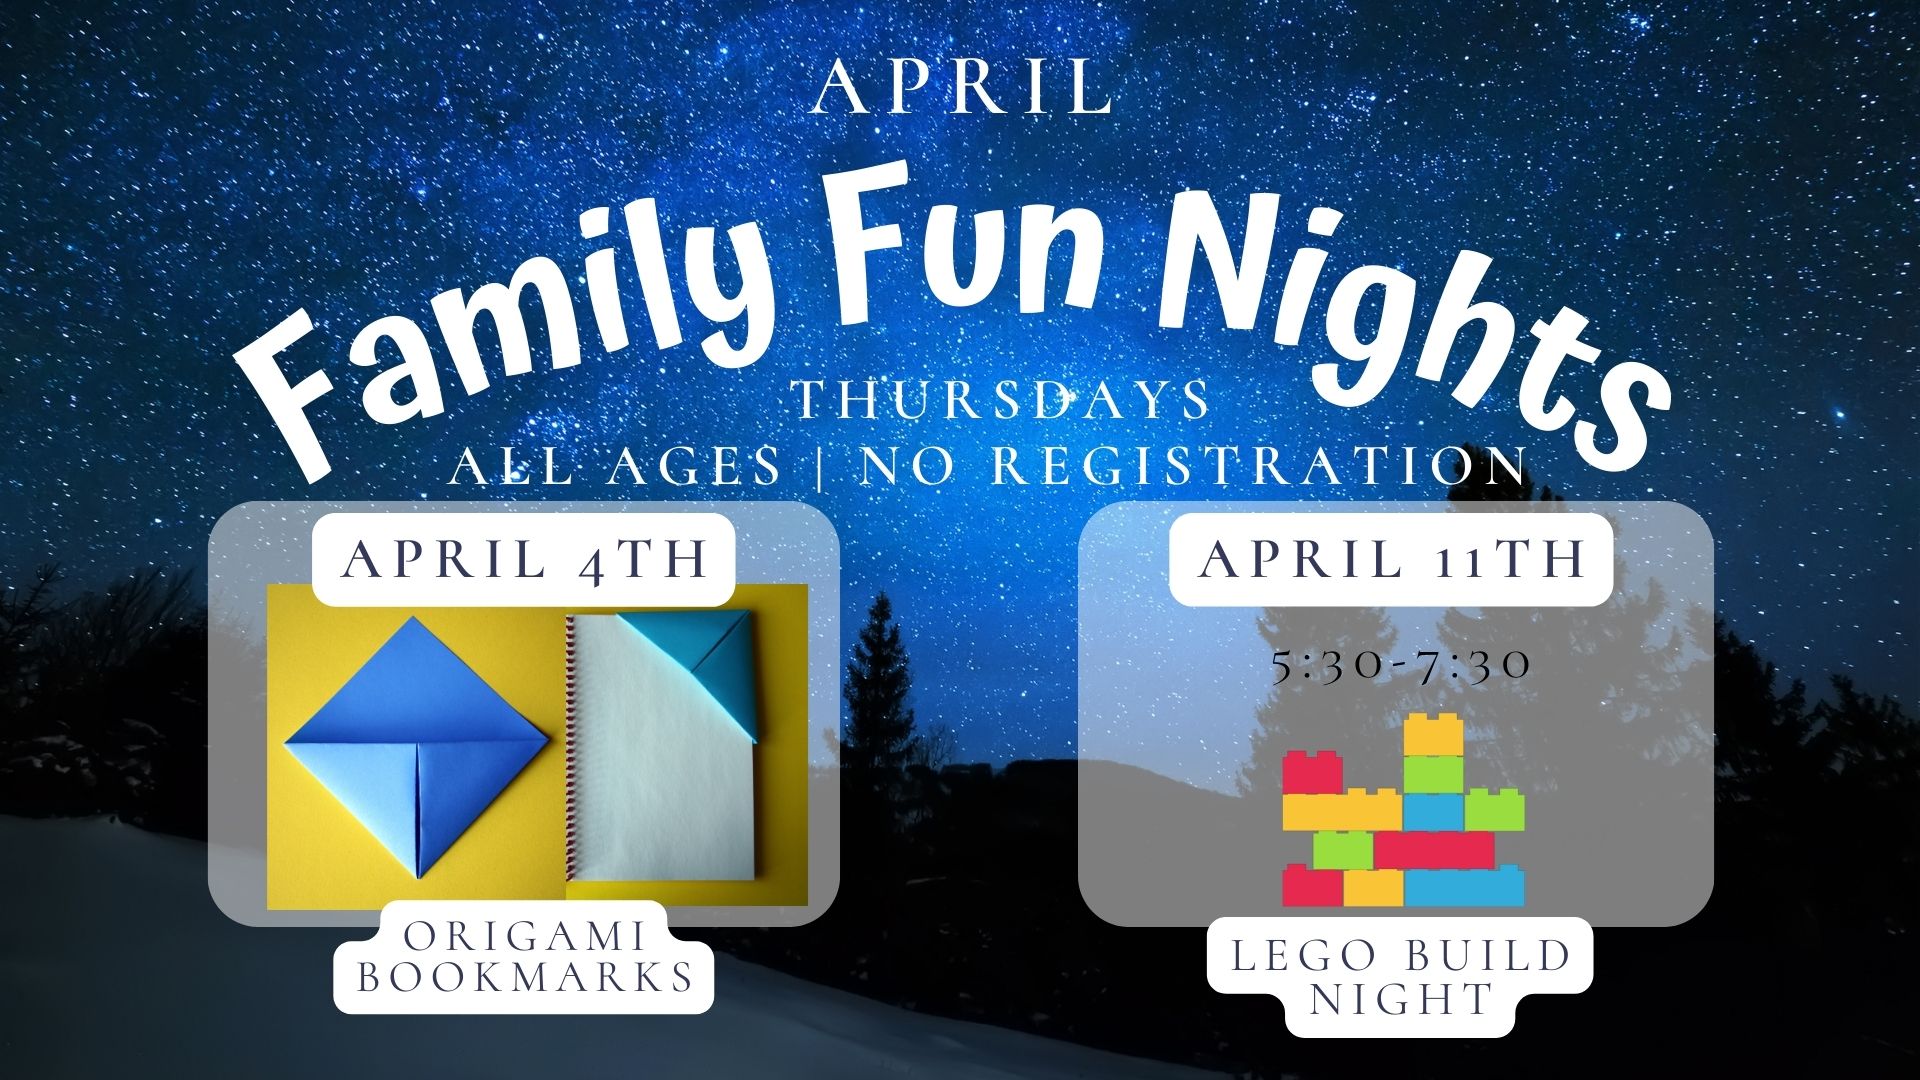 April Family Fun Nights.  Thursdays. All ages. No registration. Drop in.  April 4th Origami Bookmarks.   April 11 Lego Fun Night.